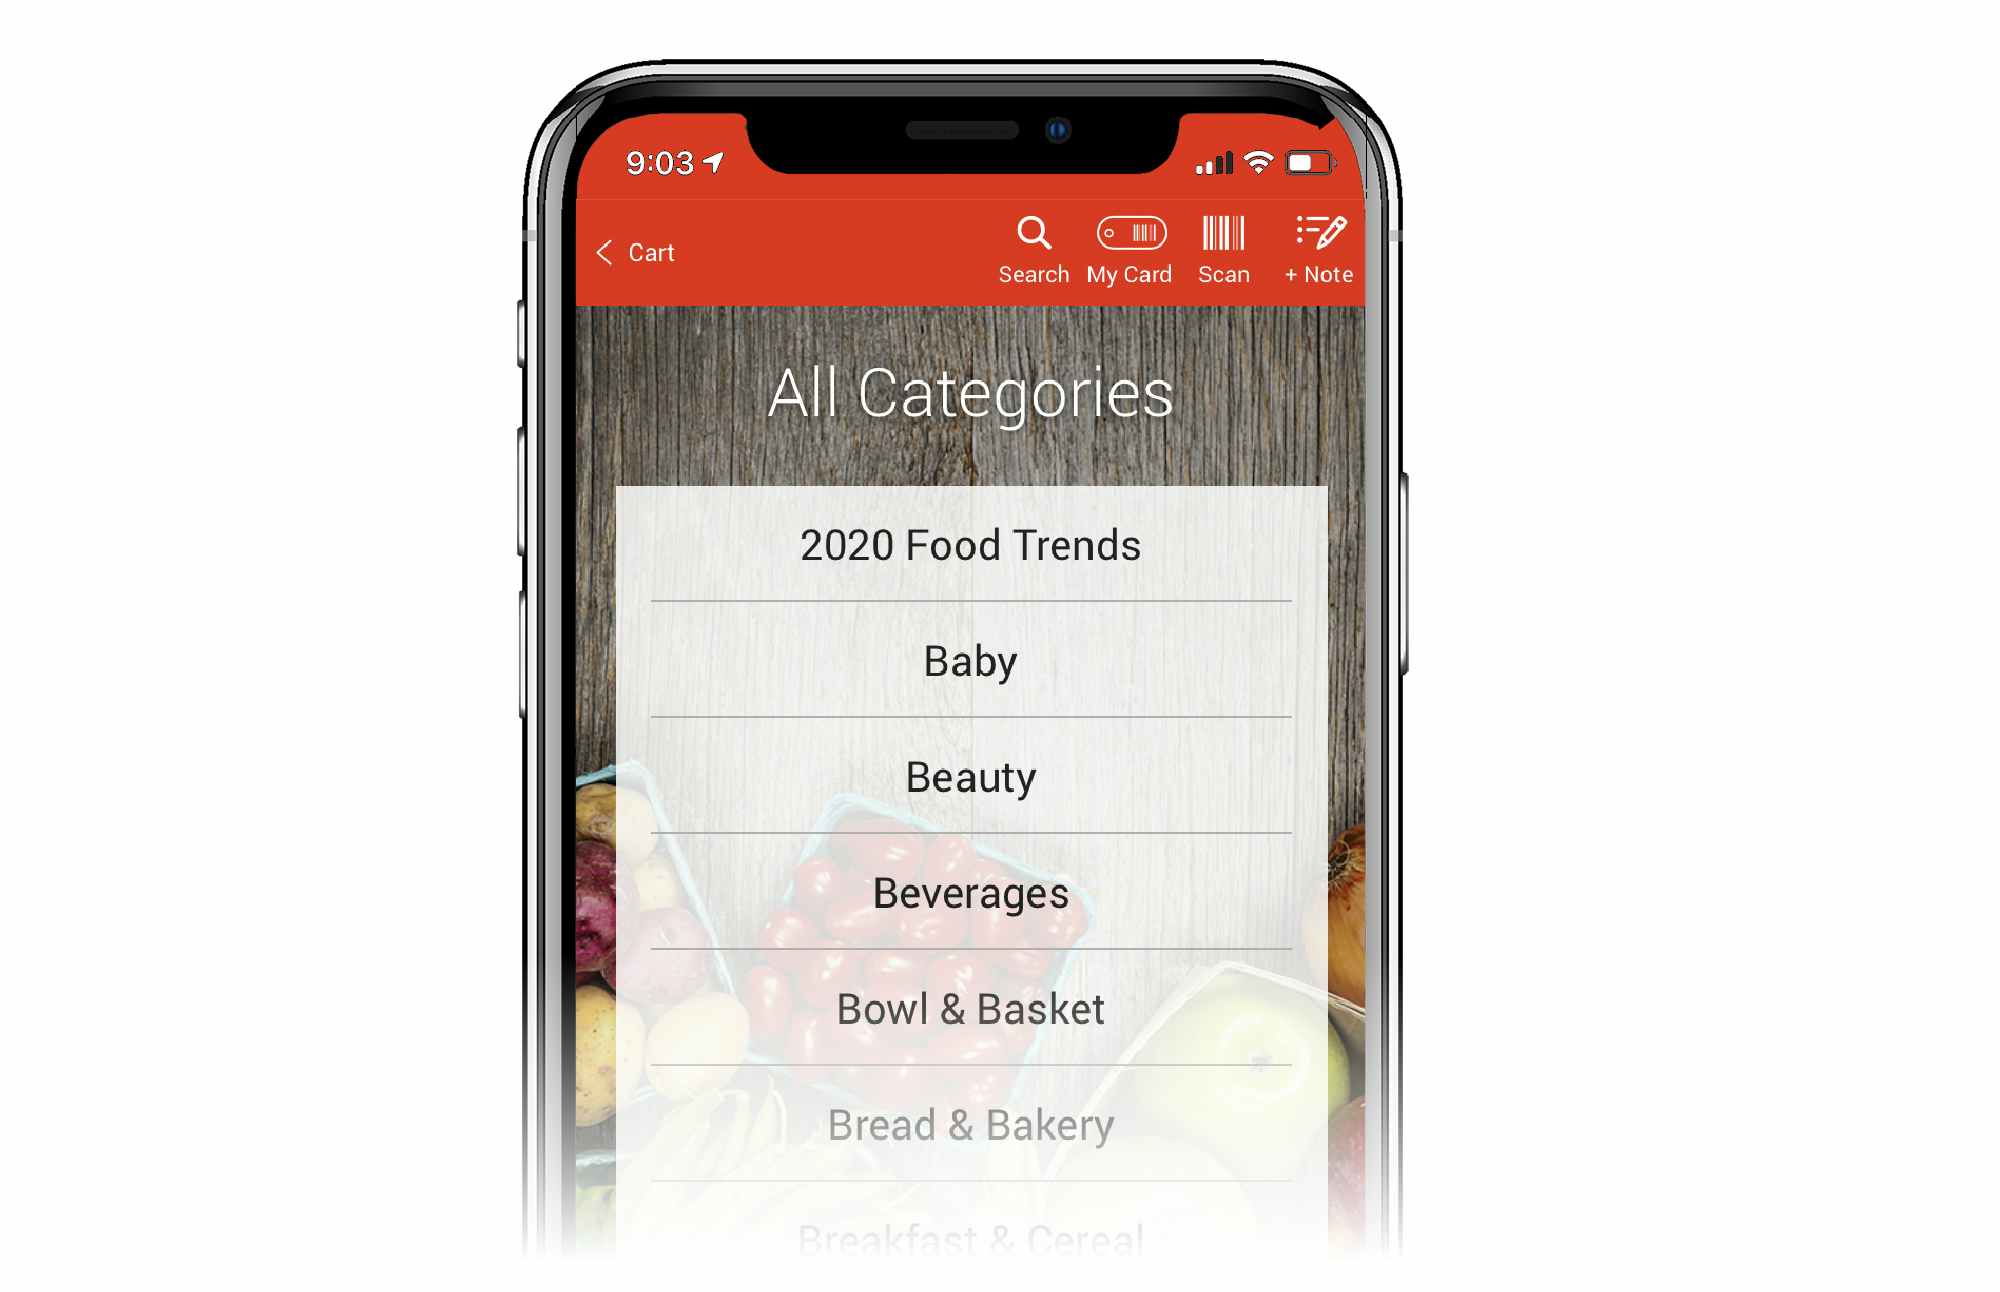 phone screen shows shoprite app with all categories listed 2020 food trends, baby, beauty, etc